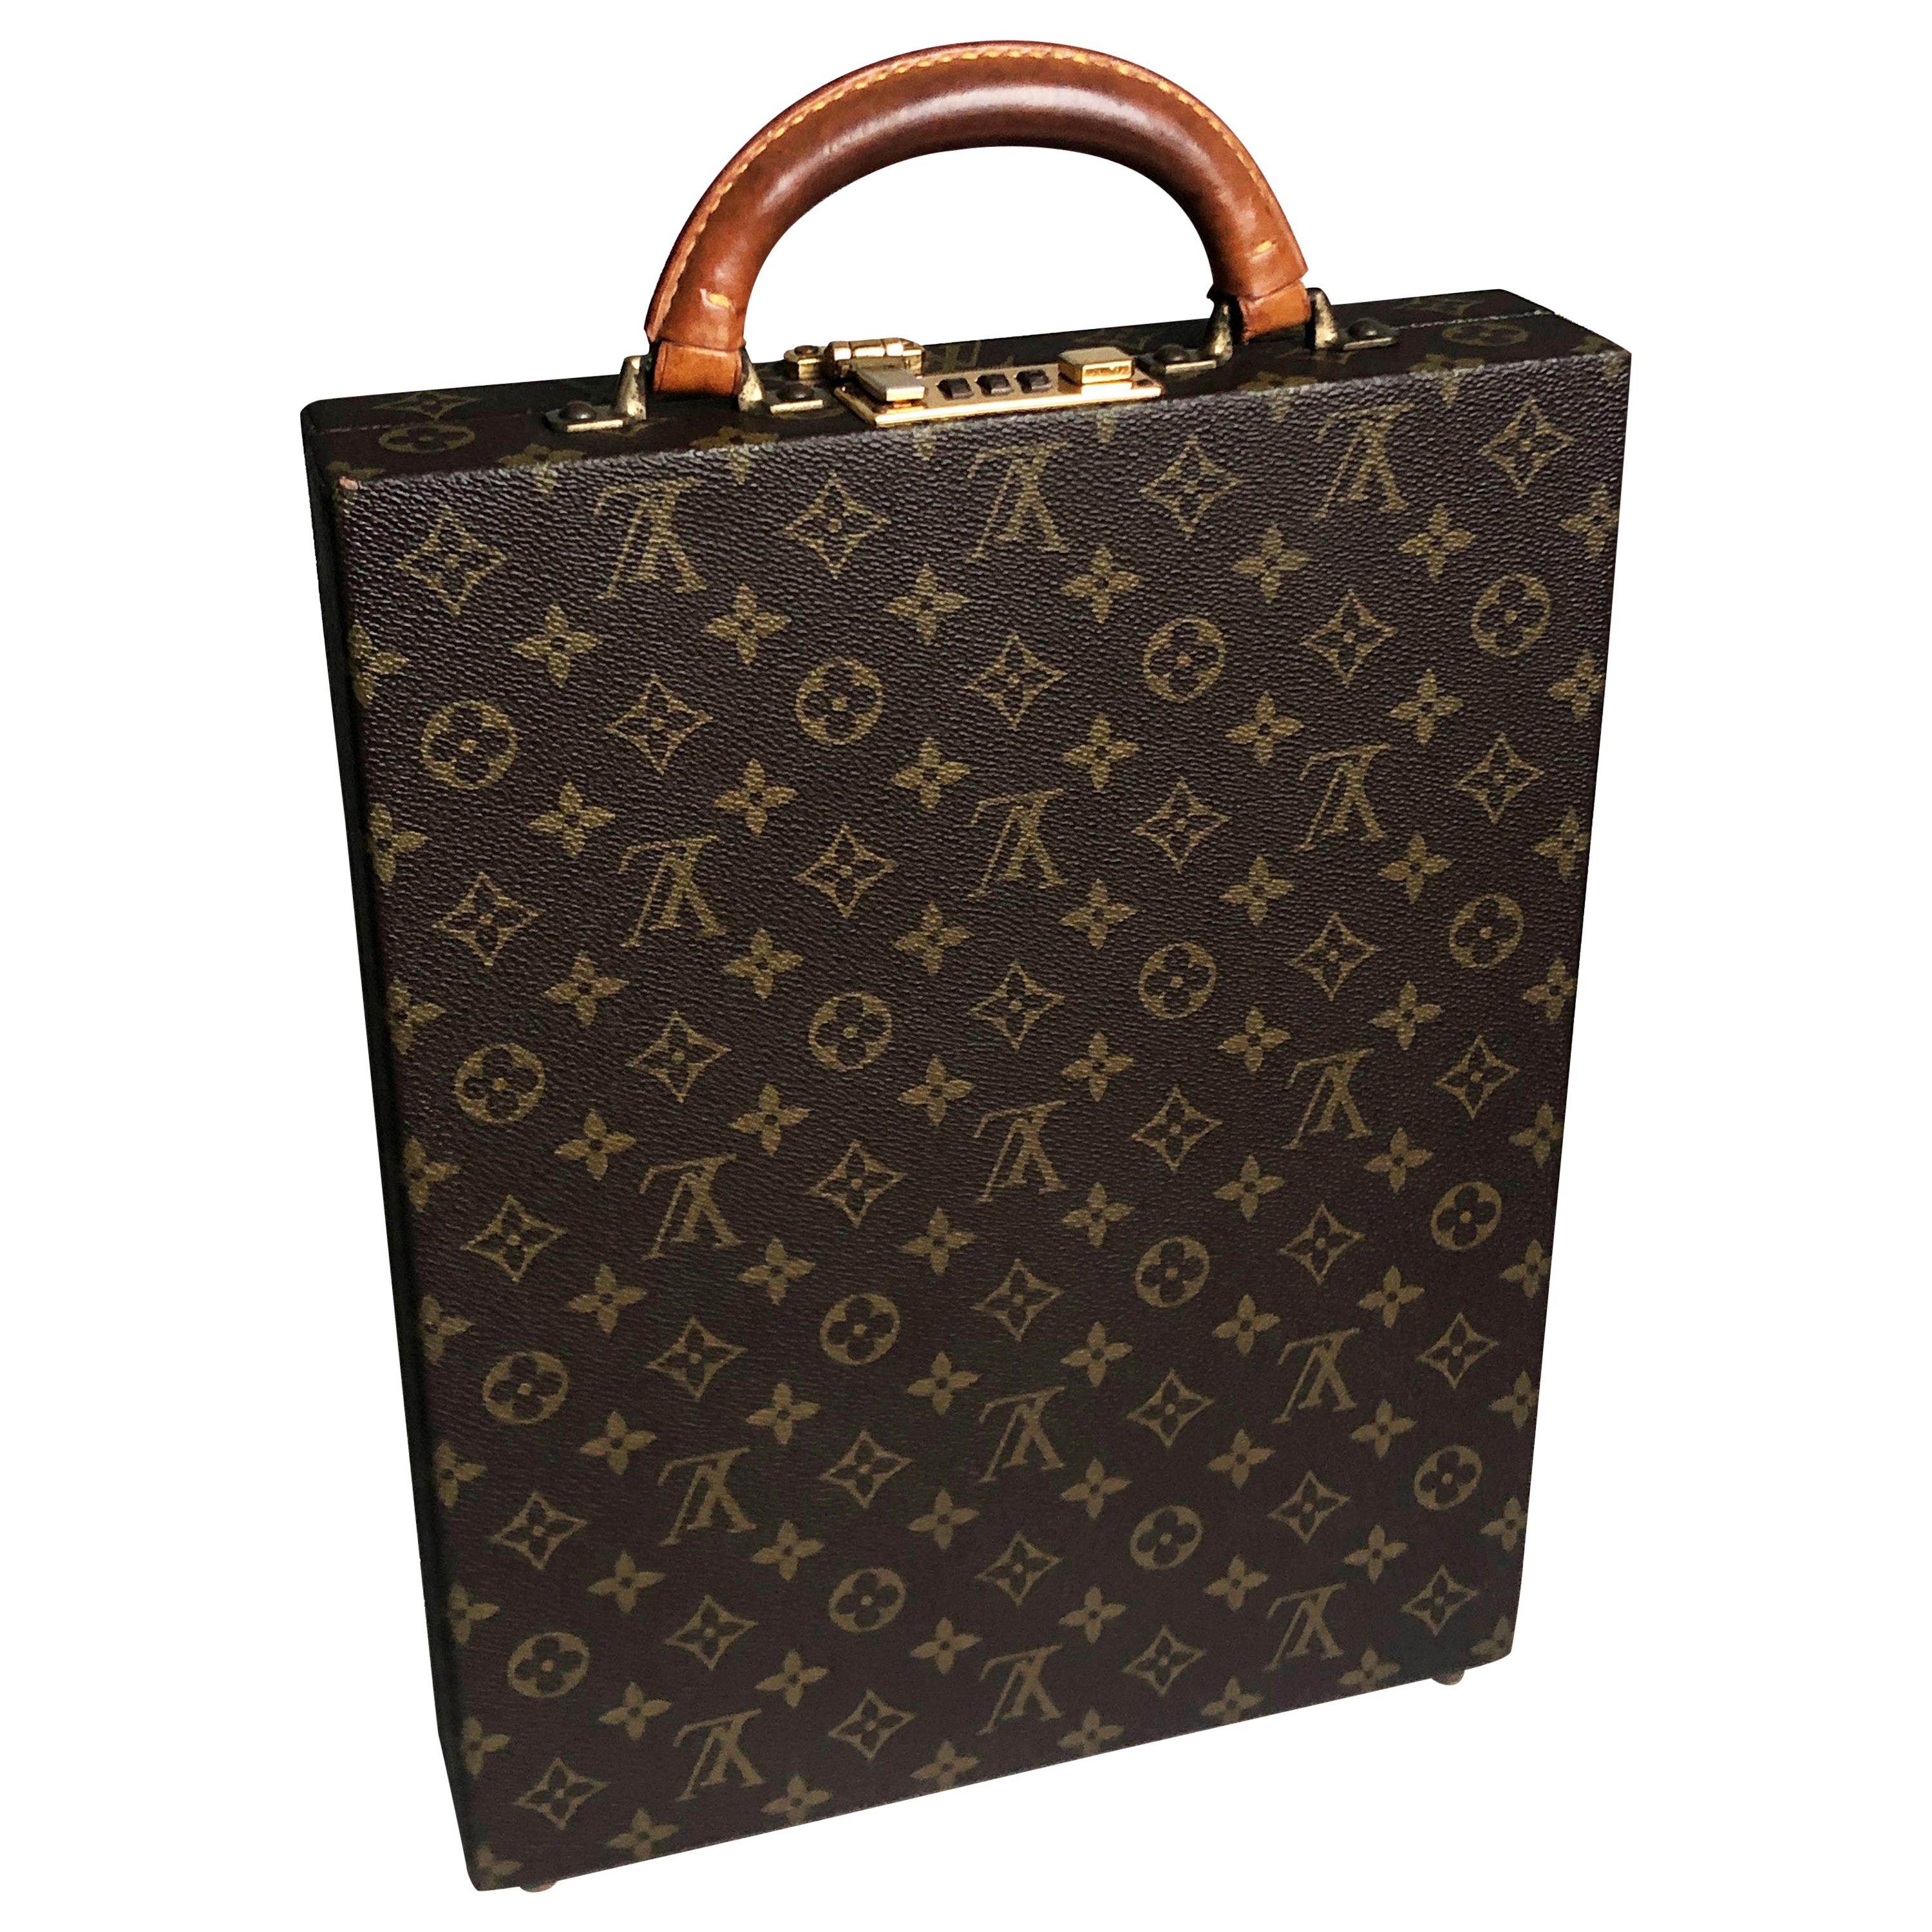 Monogrammed Canvas Briefcase from Louis Vuitton, 1980s for sale at